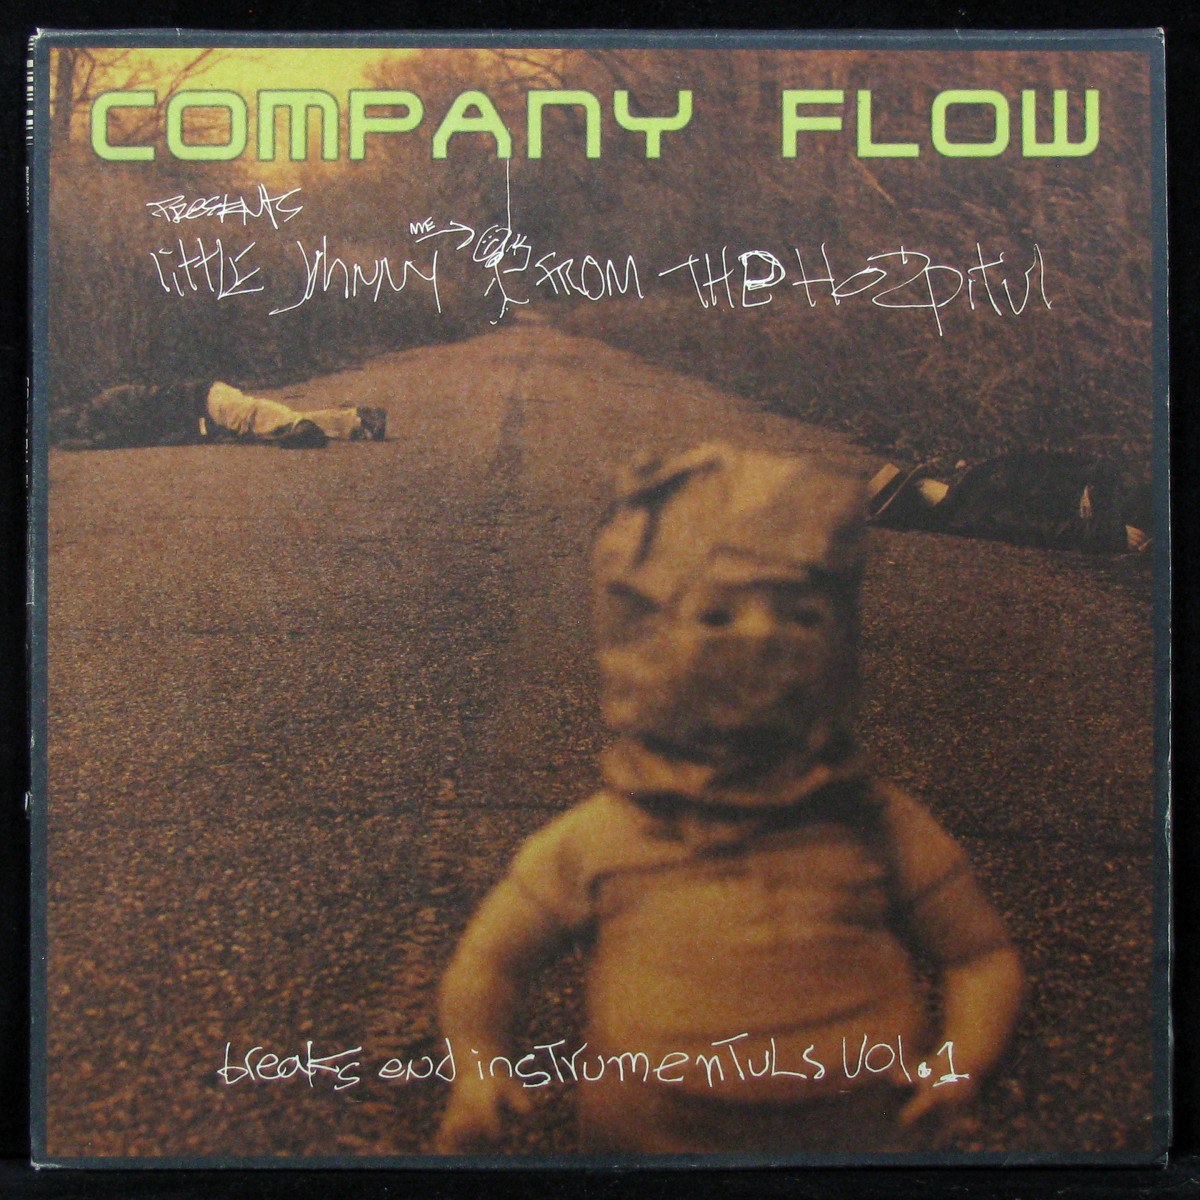 LP Company Flow — Little Johnny From The Hospitul (Breaks End Instrumentuls Vol.1) (2LP) фото